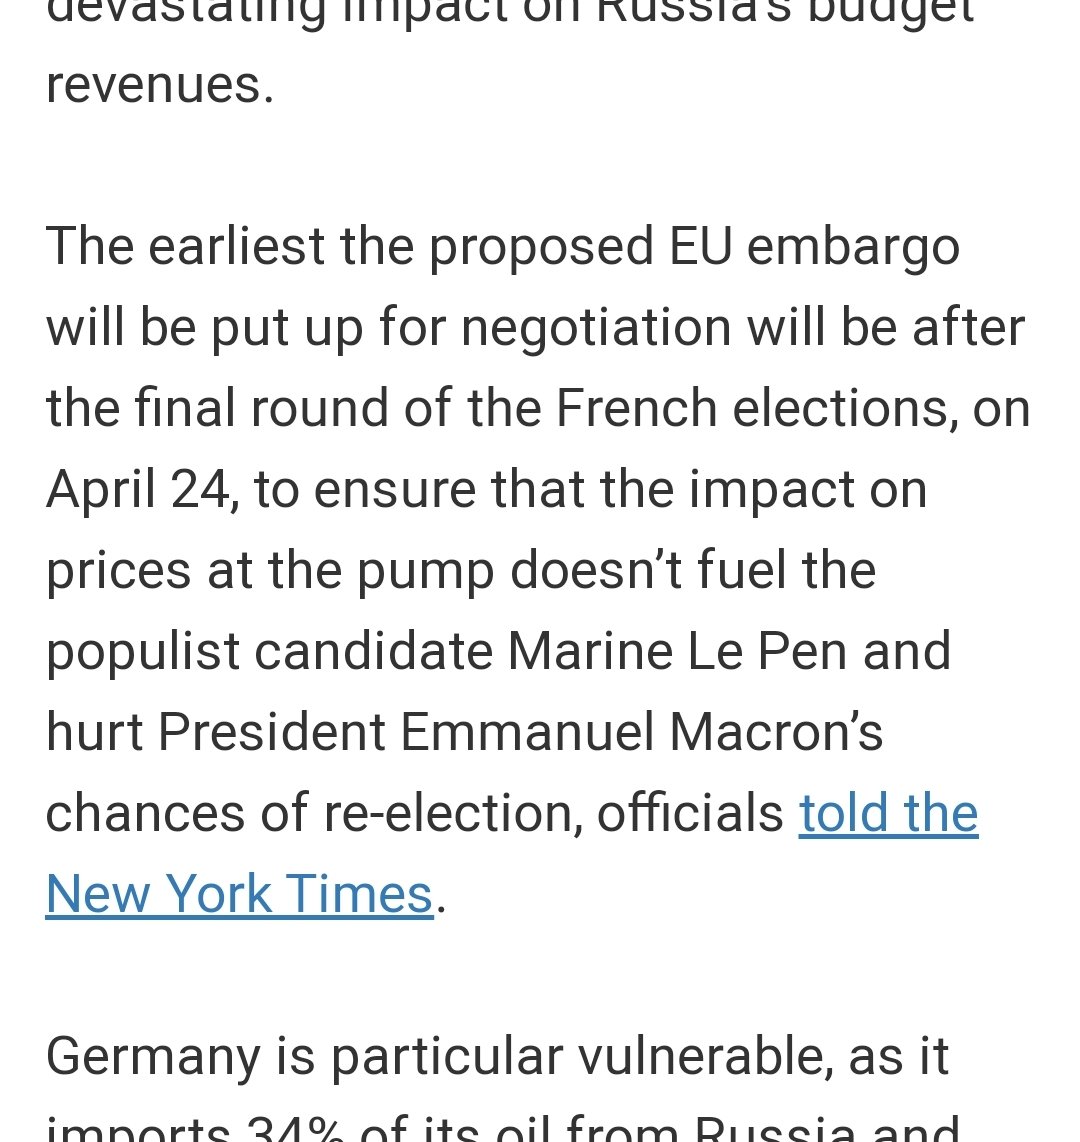 RIGGED! EU openly admits they are putting the next round of sanctions on Russia on hold until the French elections are over “to ensure that the impact on prices at the pump doesn’t fuel the populist candidate Marine Le Pen and hurt President Emmanuel Macron’s chances of re-election”. – The Donald